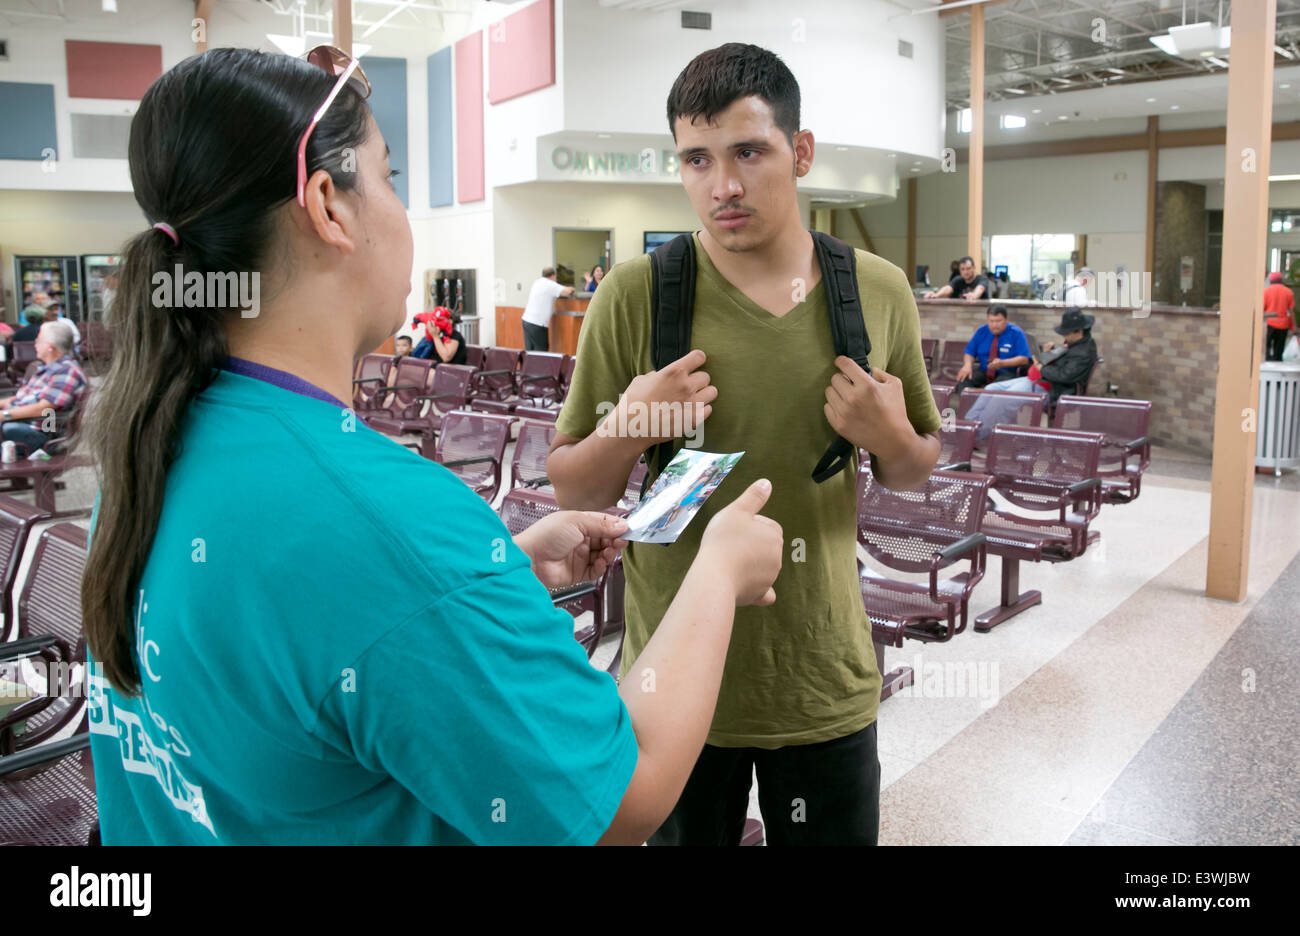 Male US citizen at McAllen, Texas bus station tries to get info on whereabouts of common law wife and child illegally brought Stock Photo